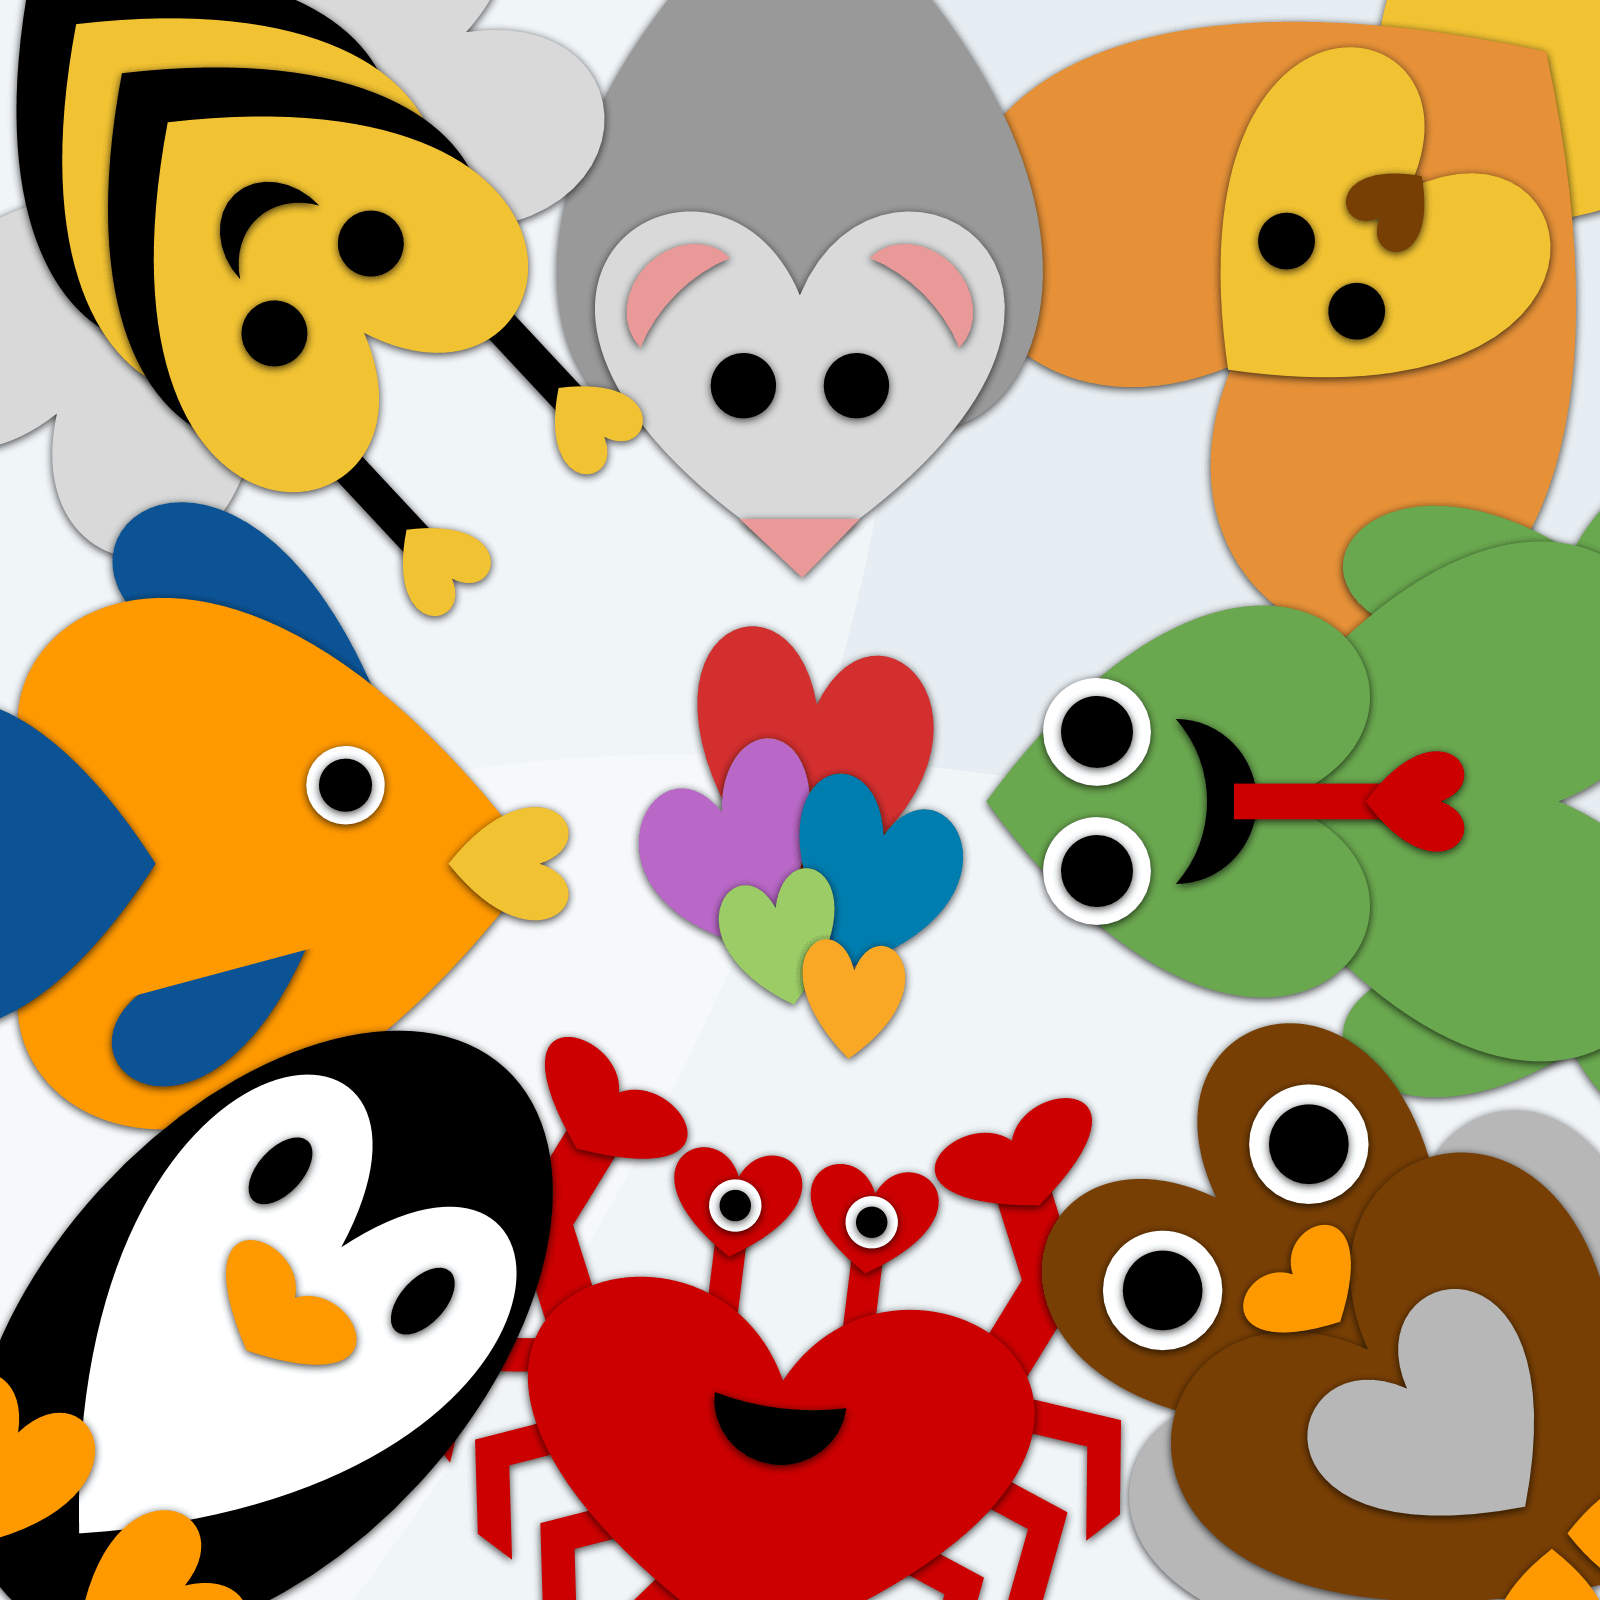 Bee, mouse, lion, frog, owl, crab, penguin, and fish drawings made with mostly hearts